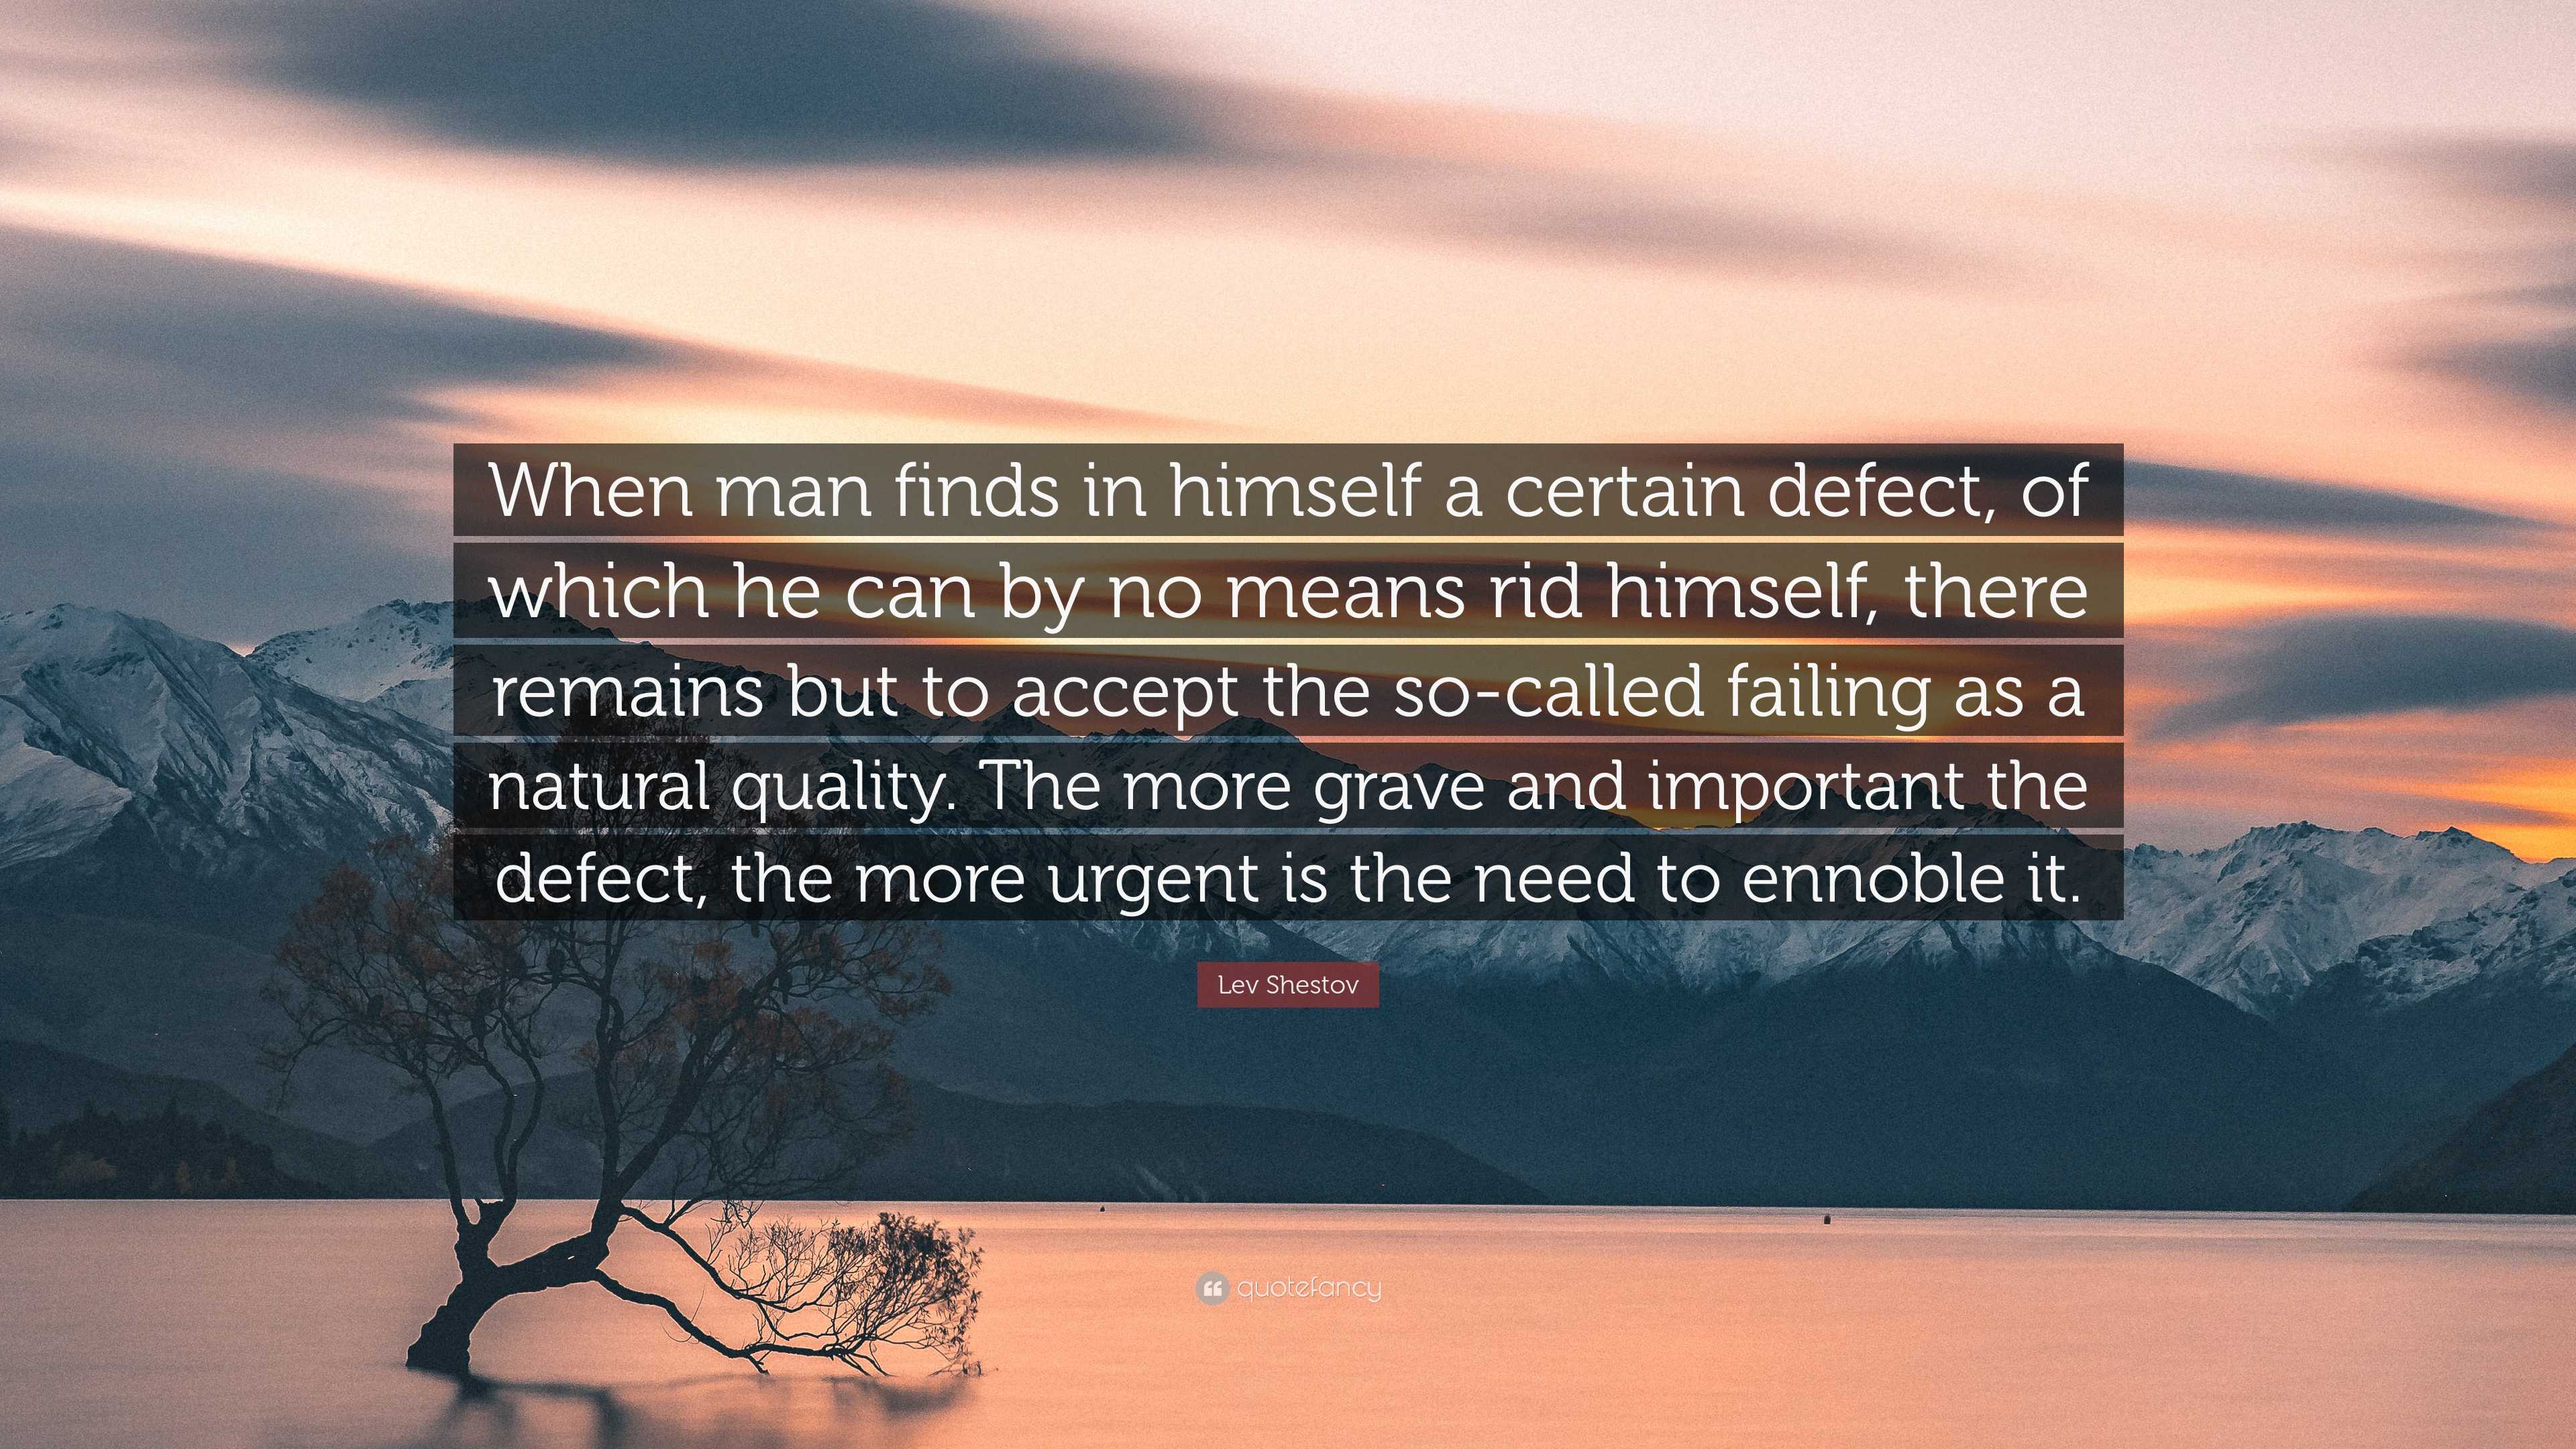 Lev Shestov Quote: “When man finds in himself a certain defect, of ...